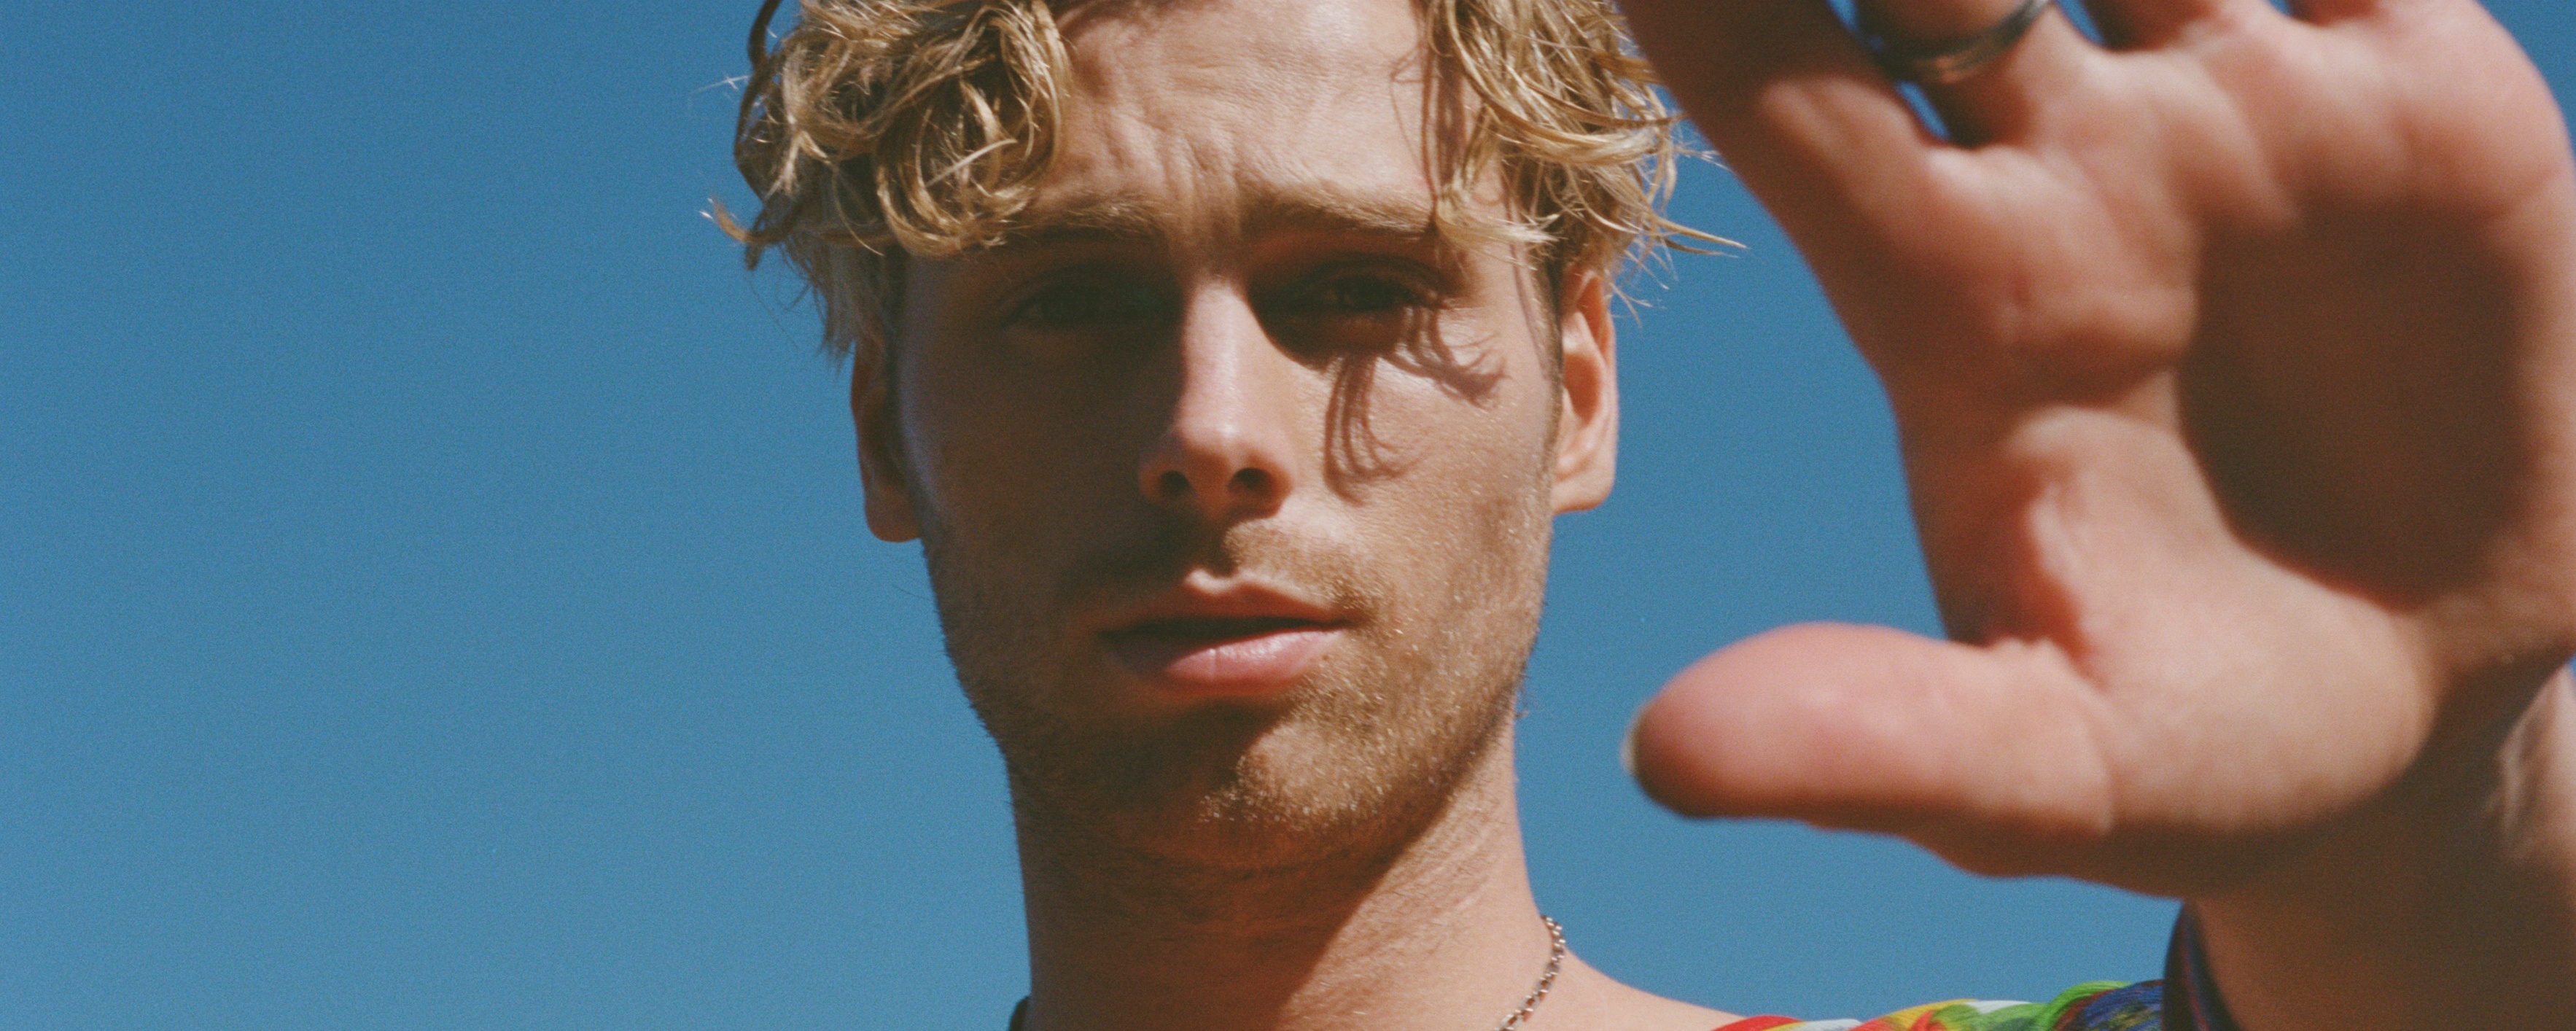 Luke Hemmings of 5 Seconds of Summer Opens Up About Solo Debut and Growing Up in the Spotlight: ”There Was Never Time To Process Any Of It“